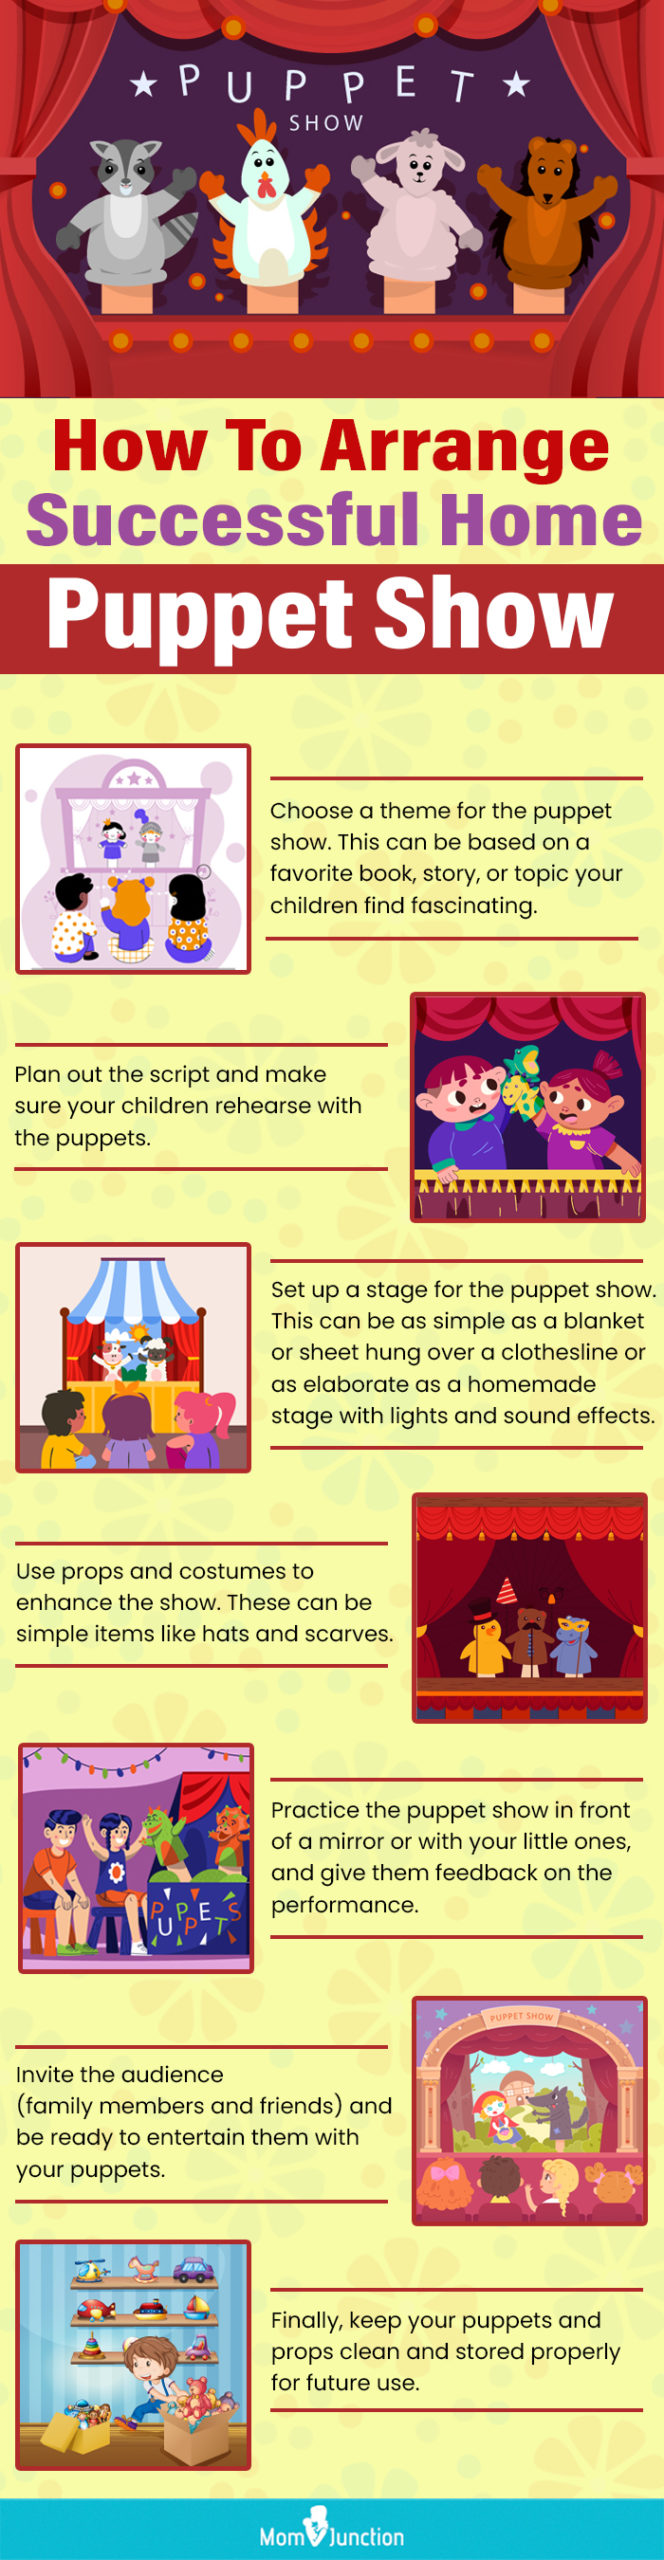 how to arrange successful home puppet (infographic)